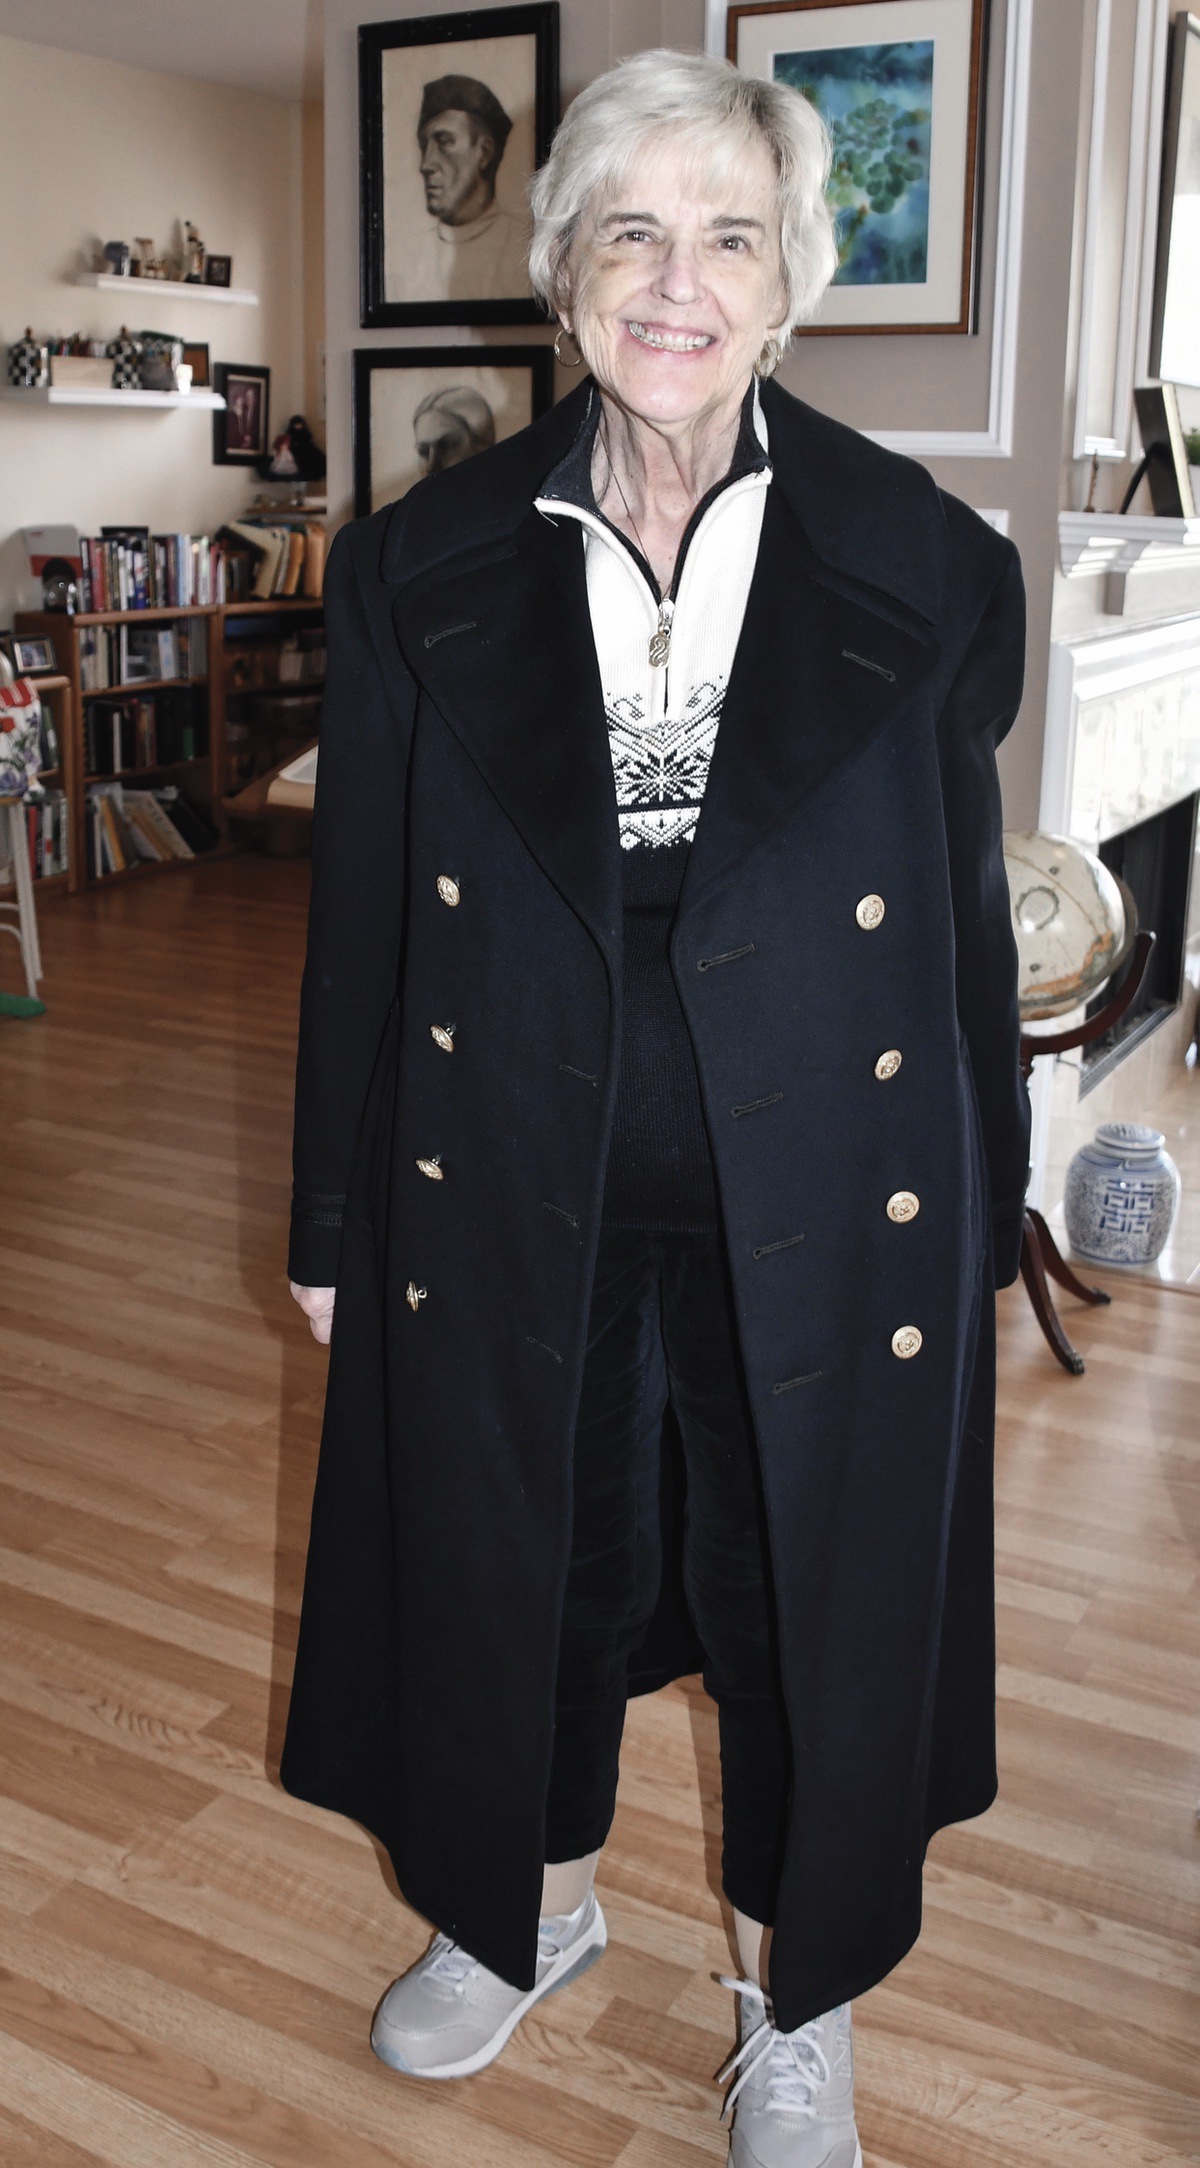 Marie Kelly sporting her Father’s Navy WWII Woolen Bridge coat. (Photos by Christine Such/My Sun Day News)